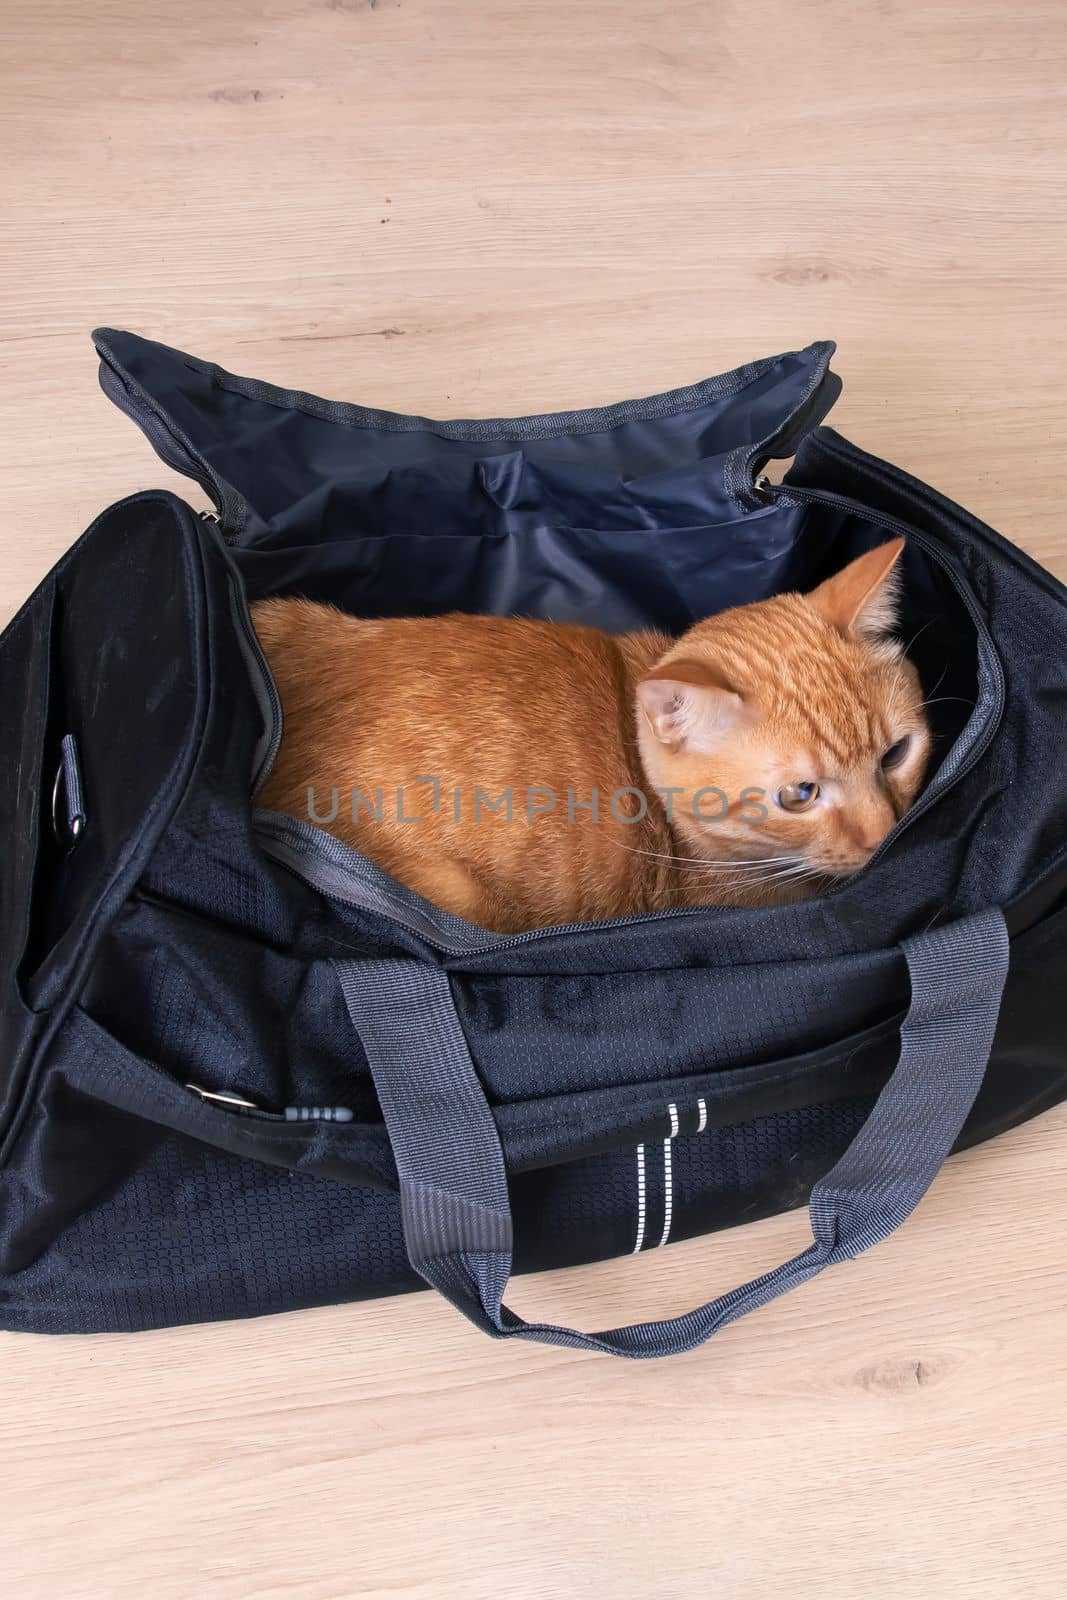 Red cat sitting in a travel bag by Vera1703